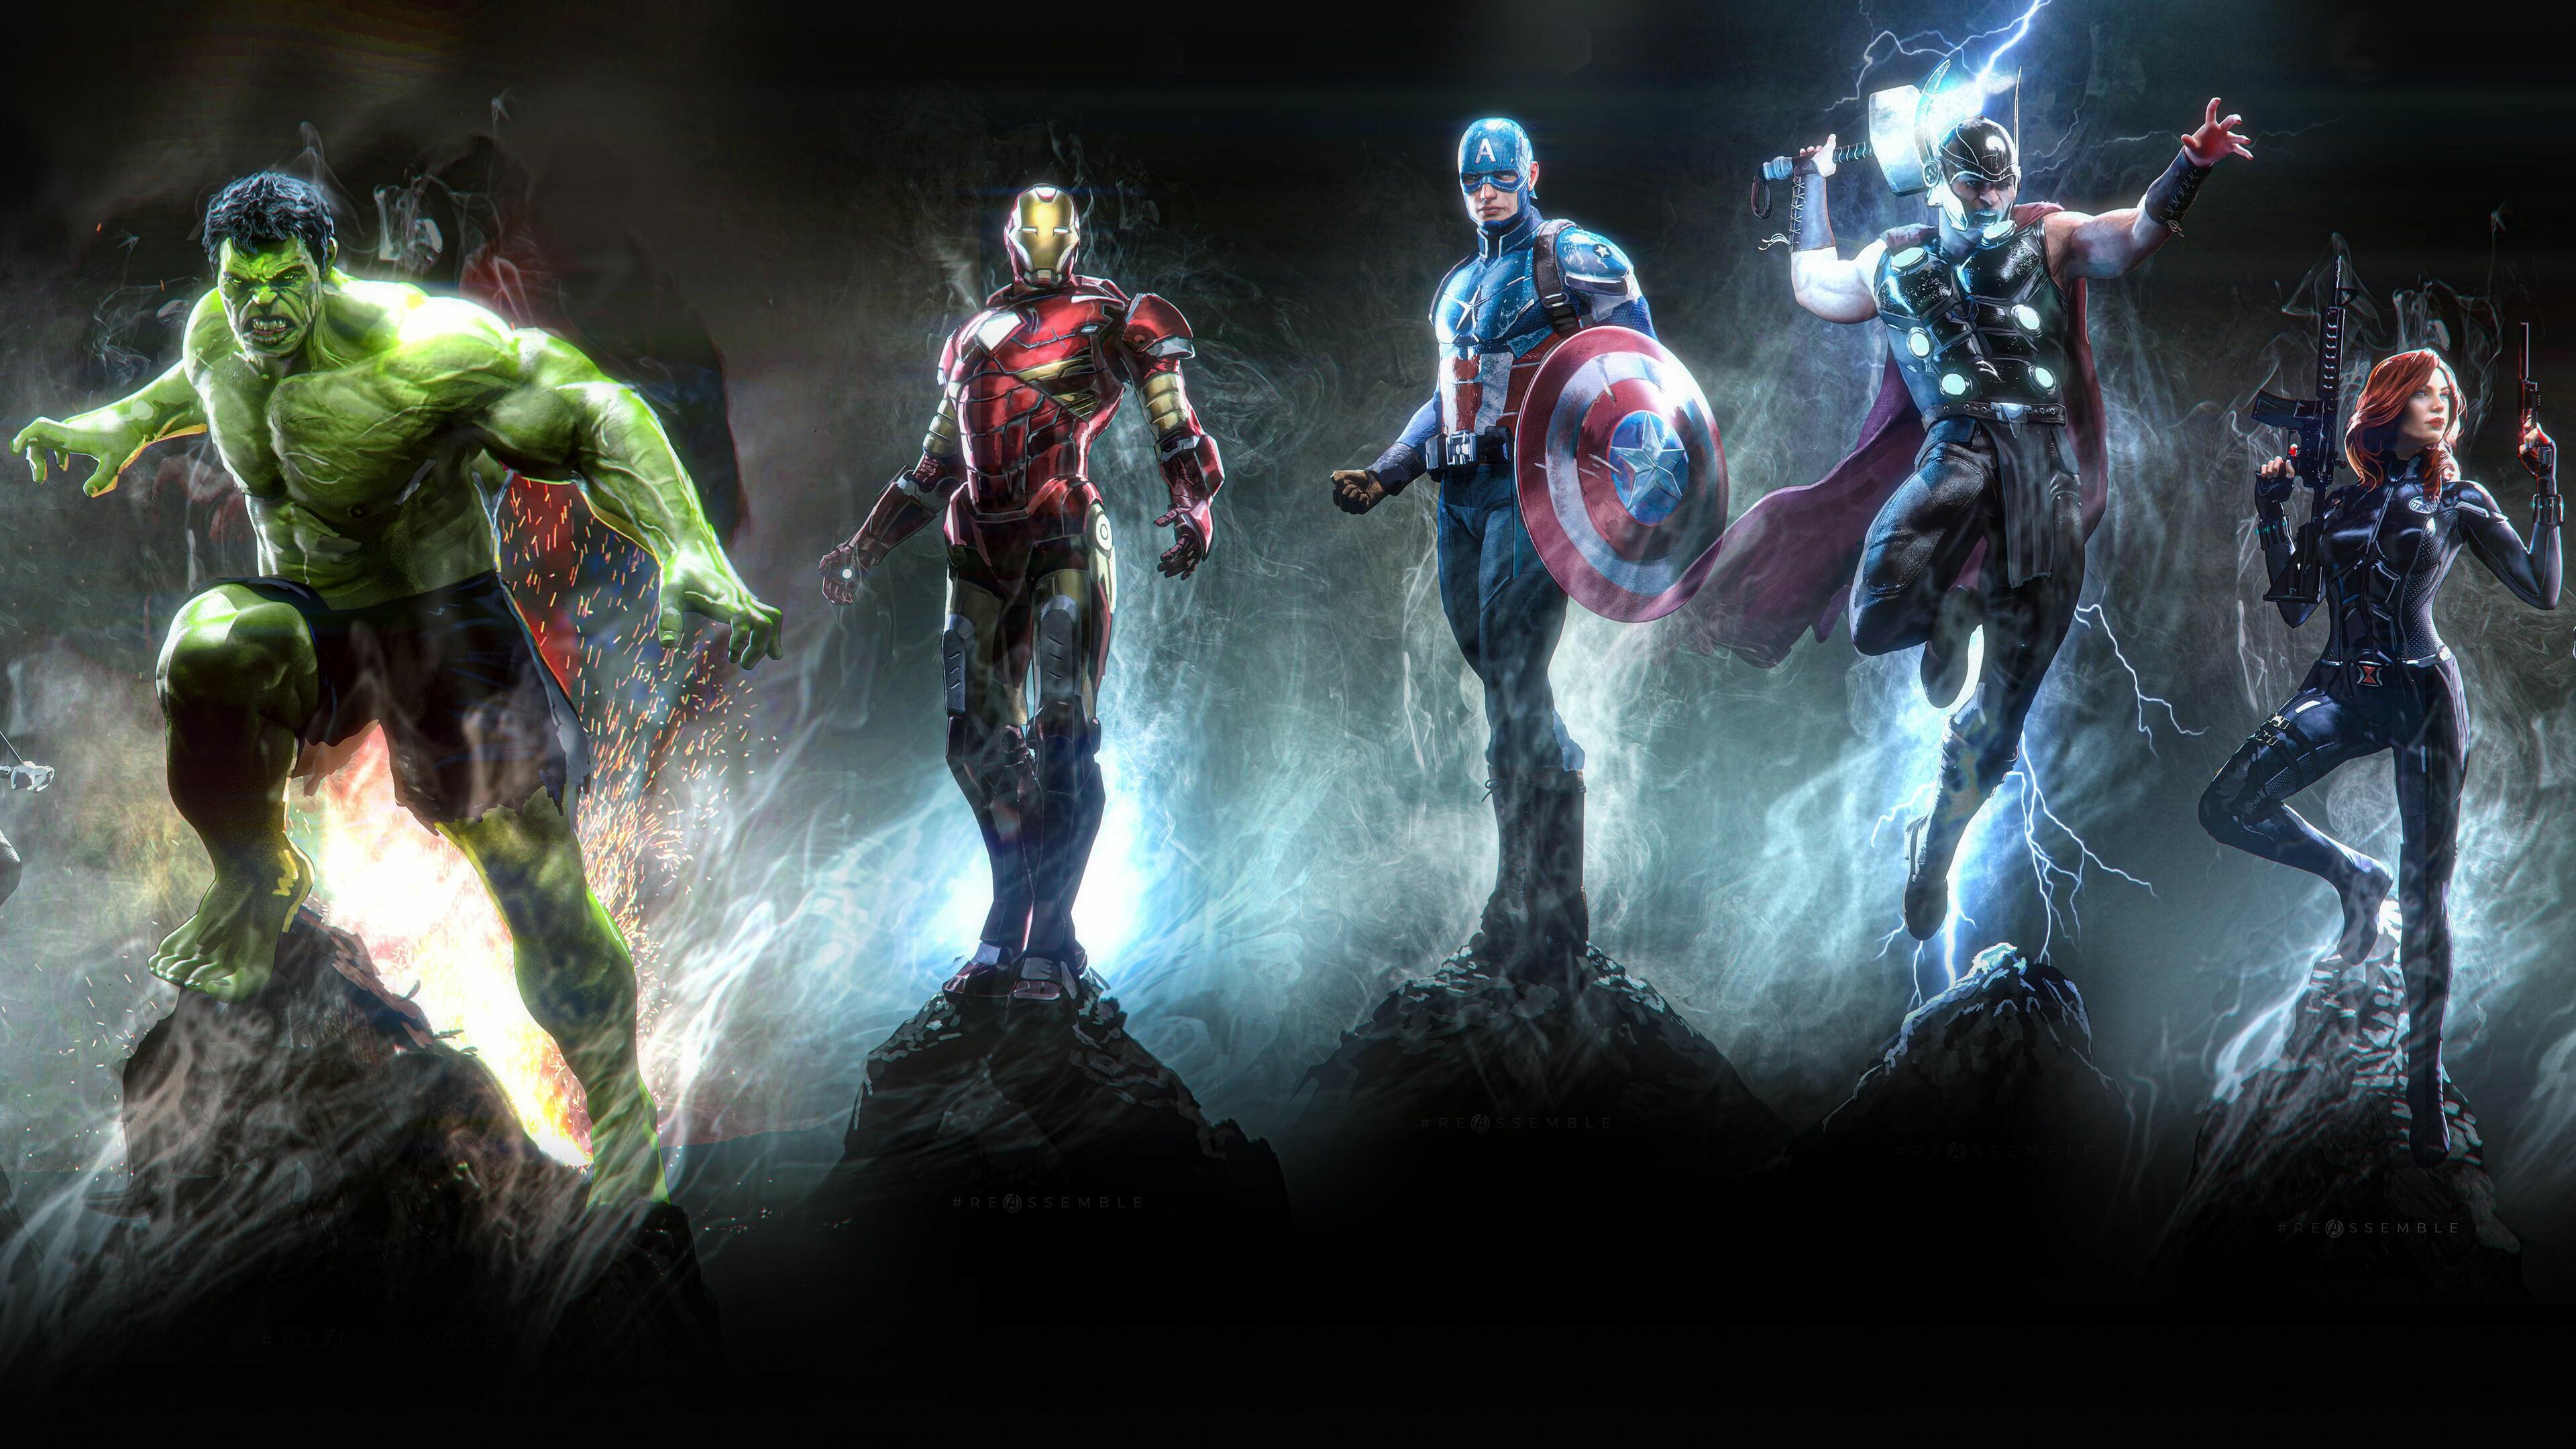 Avengers: A team of superheroes and the protagonists of the Marvel Cinematic Universe media franchise, based on the Marvel Comics team of the same name created by Stan Lee and Jack Kirby in 1963. 3840x2160 4K Wallpaper.